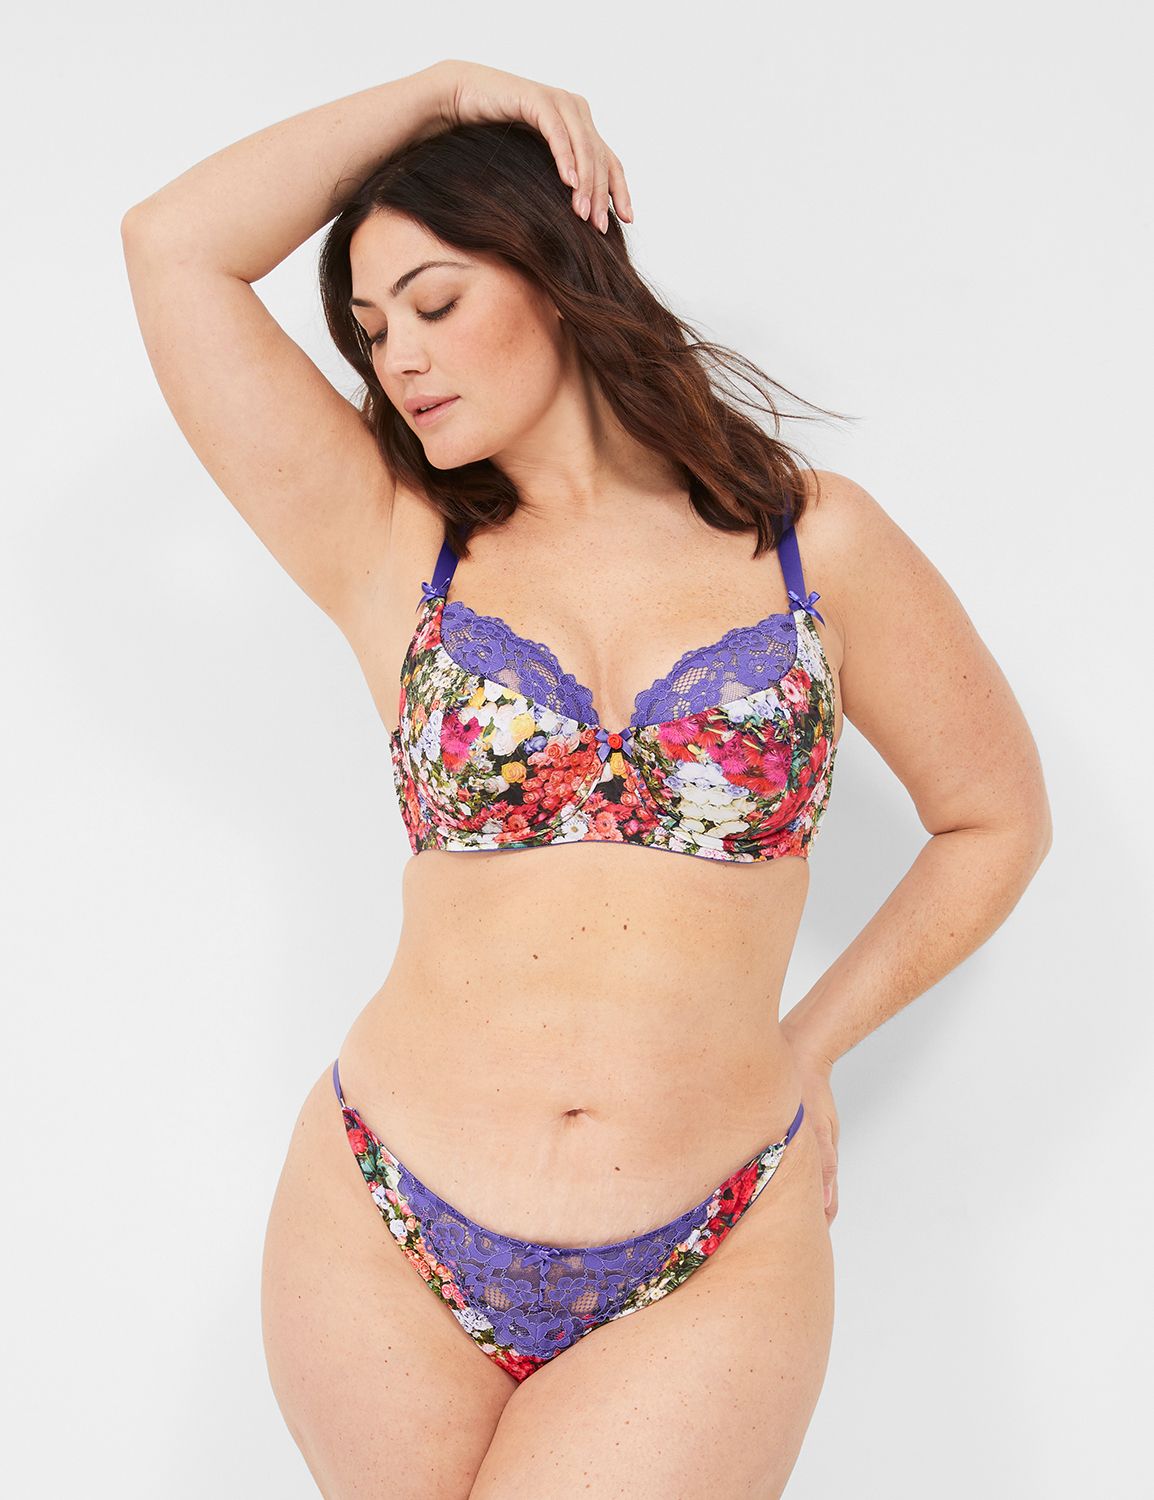 Cacique Size 38F Lightly Lined Balconette Bra Black Floral - $35 New With  Tags - From Ashley